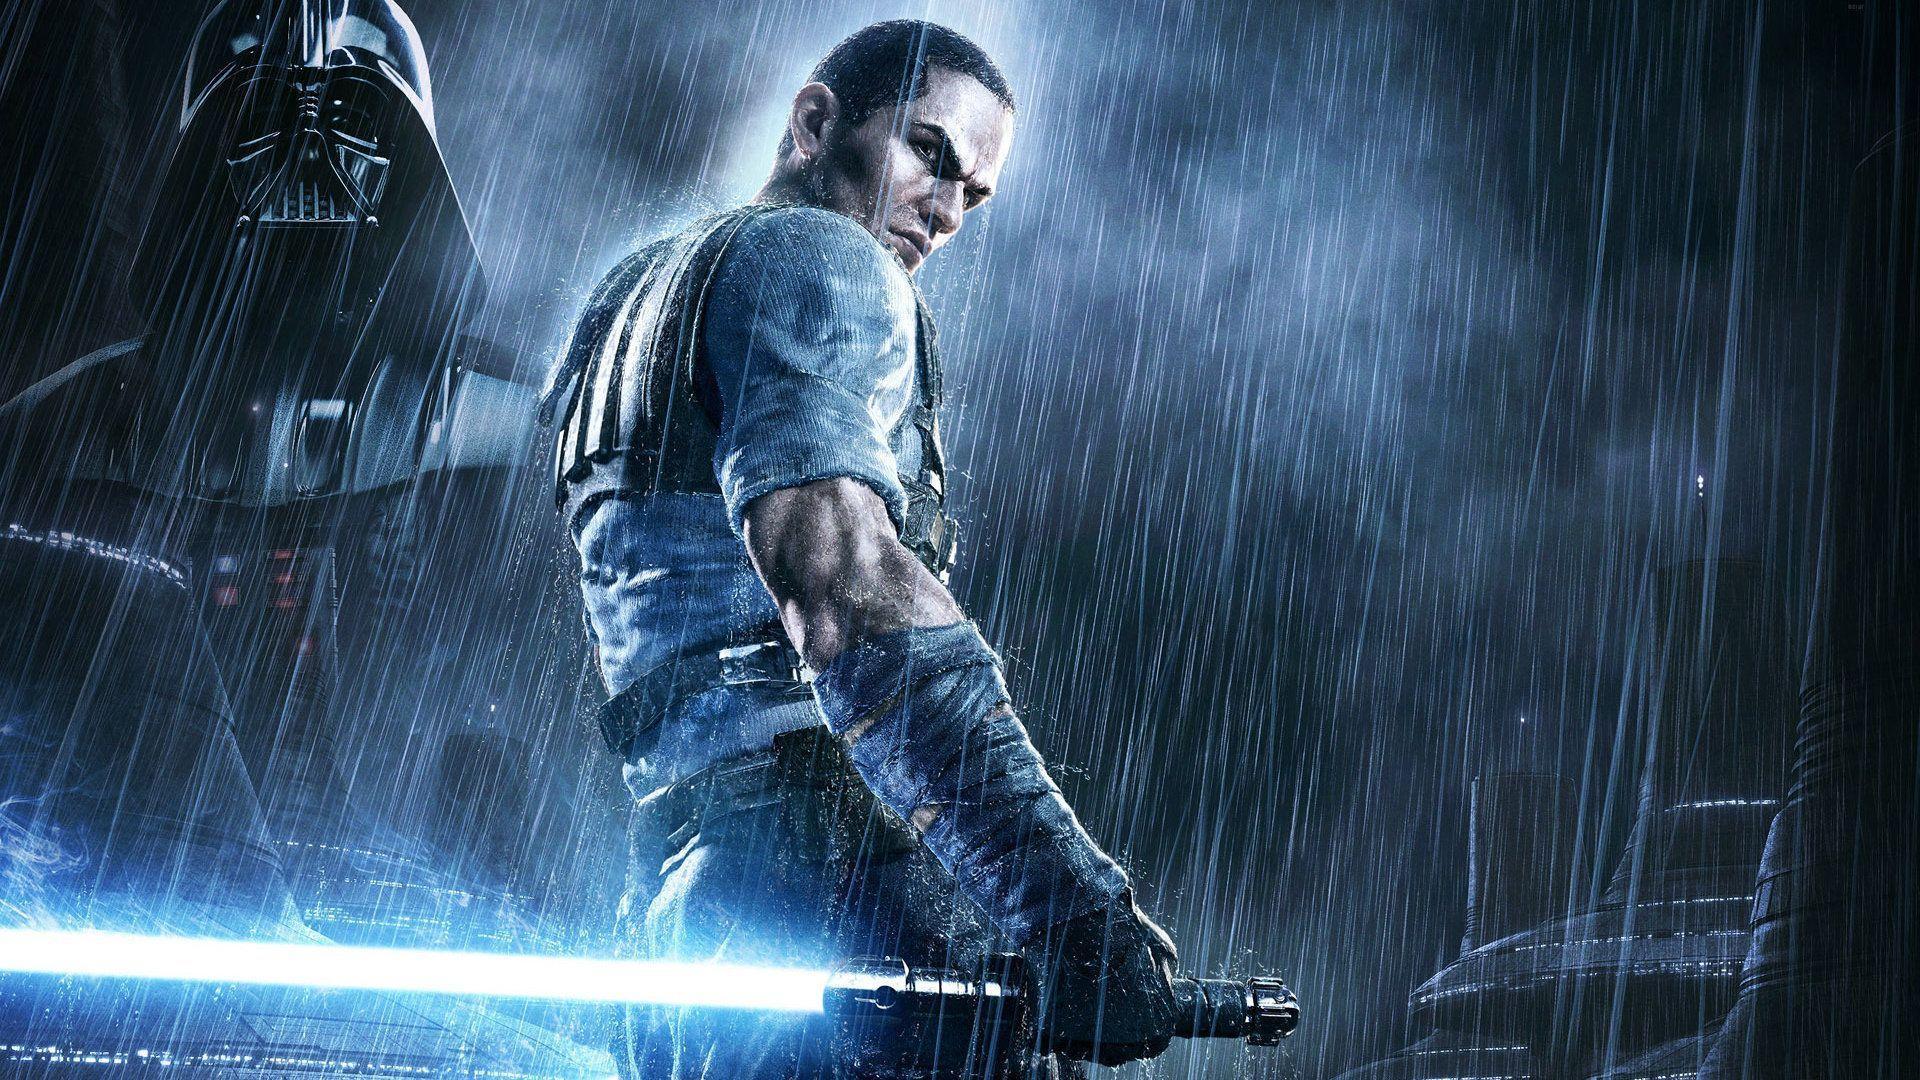 Star Wars The Force Unleashed 2 Wallpapers - Wallpaper Cave - Star Wars The Force Unleashed 2 Pc